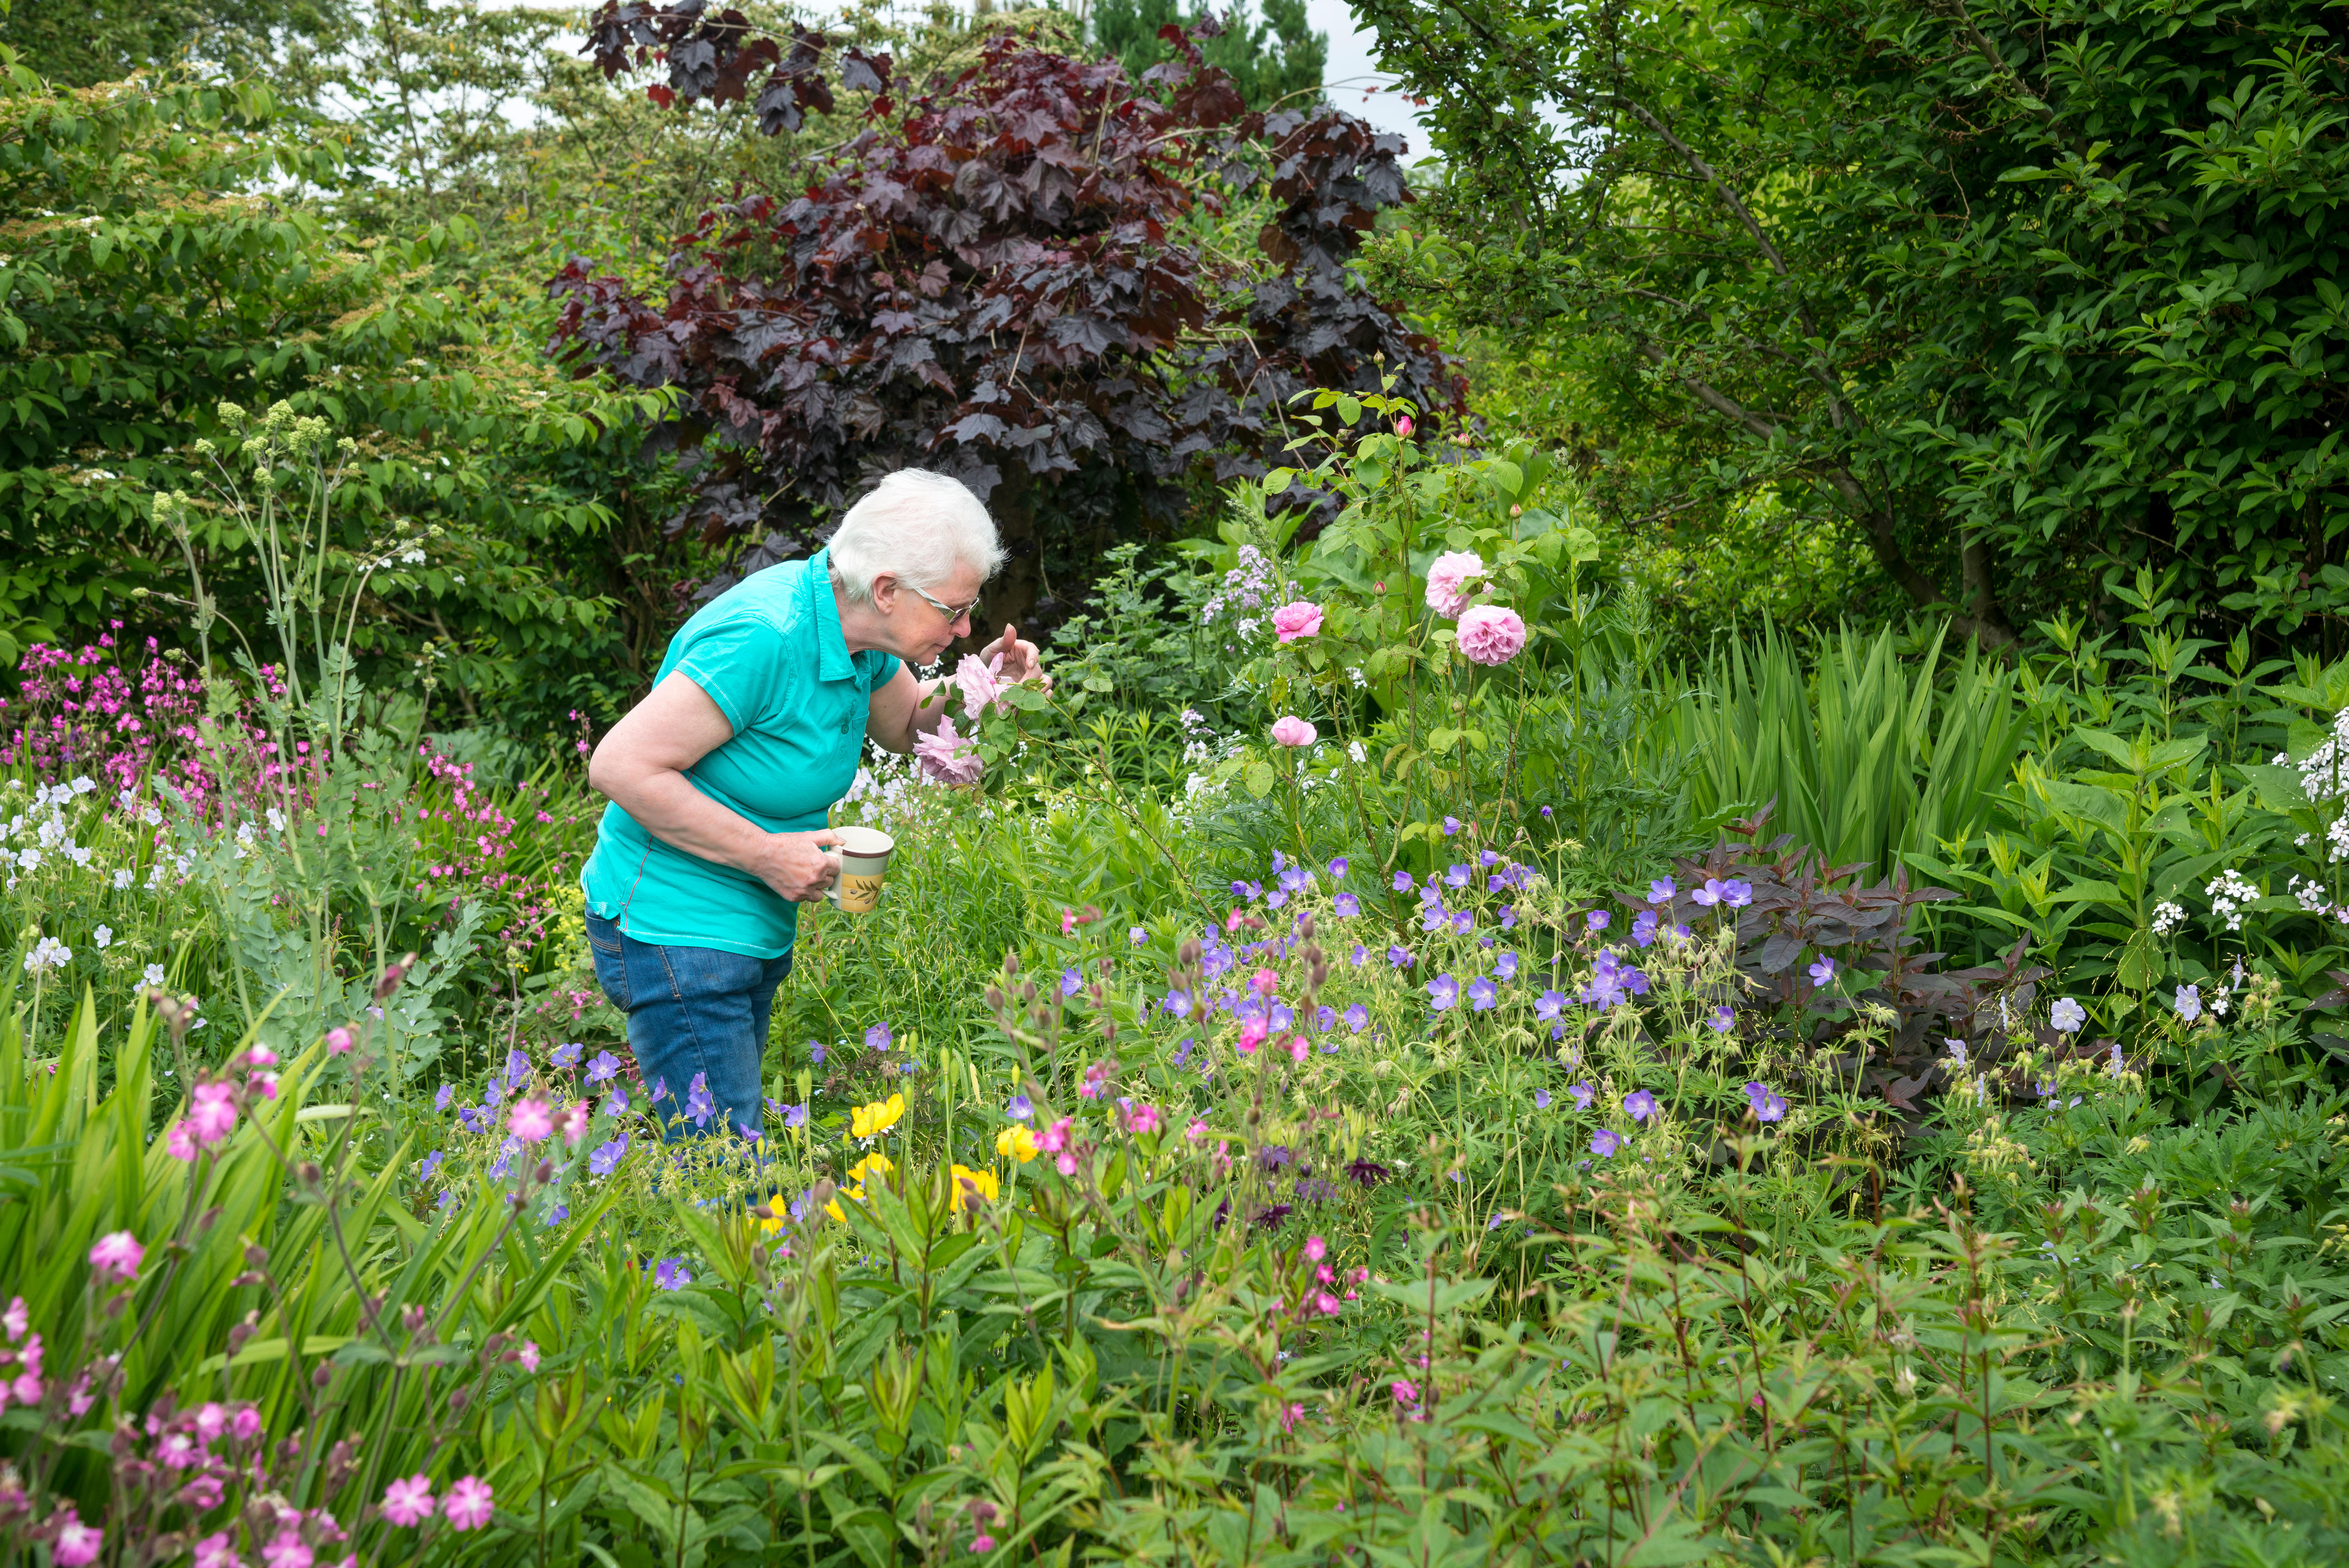 Mature lady smells roses in an english country garden